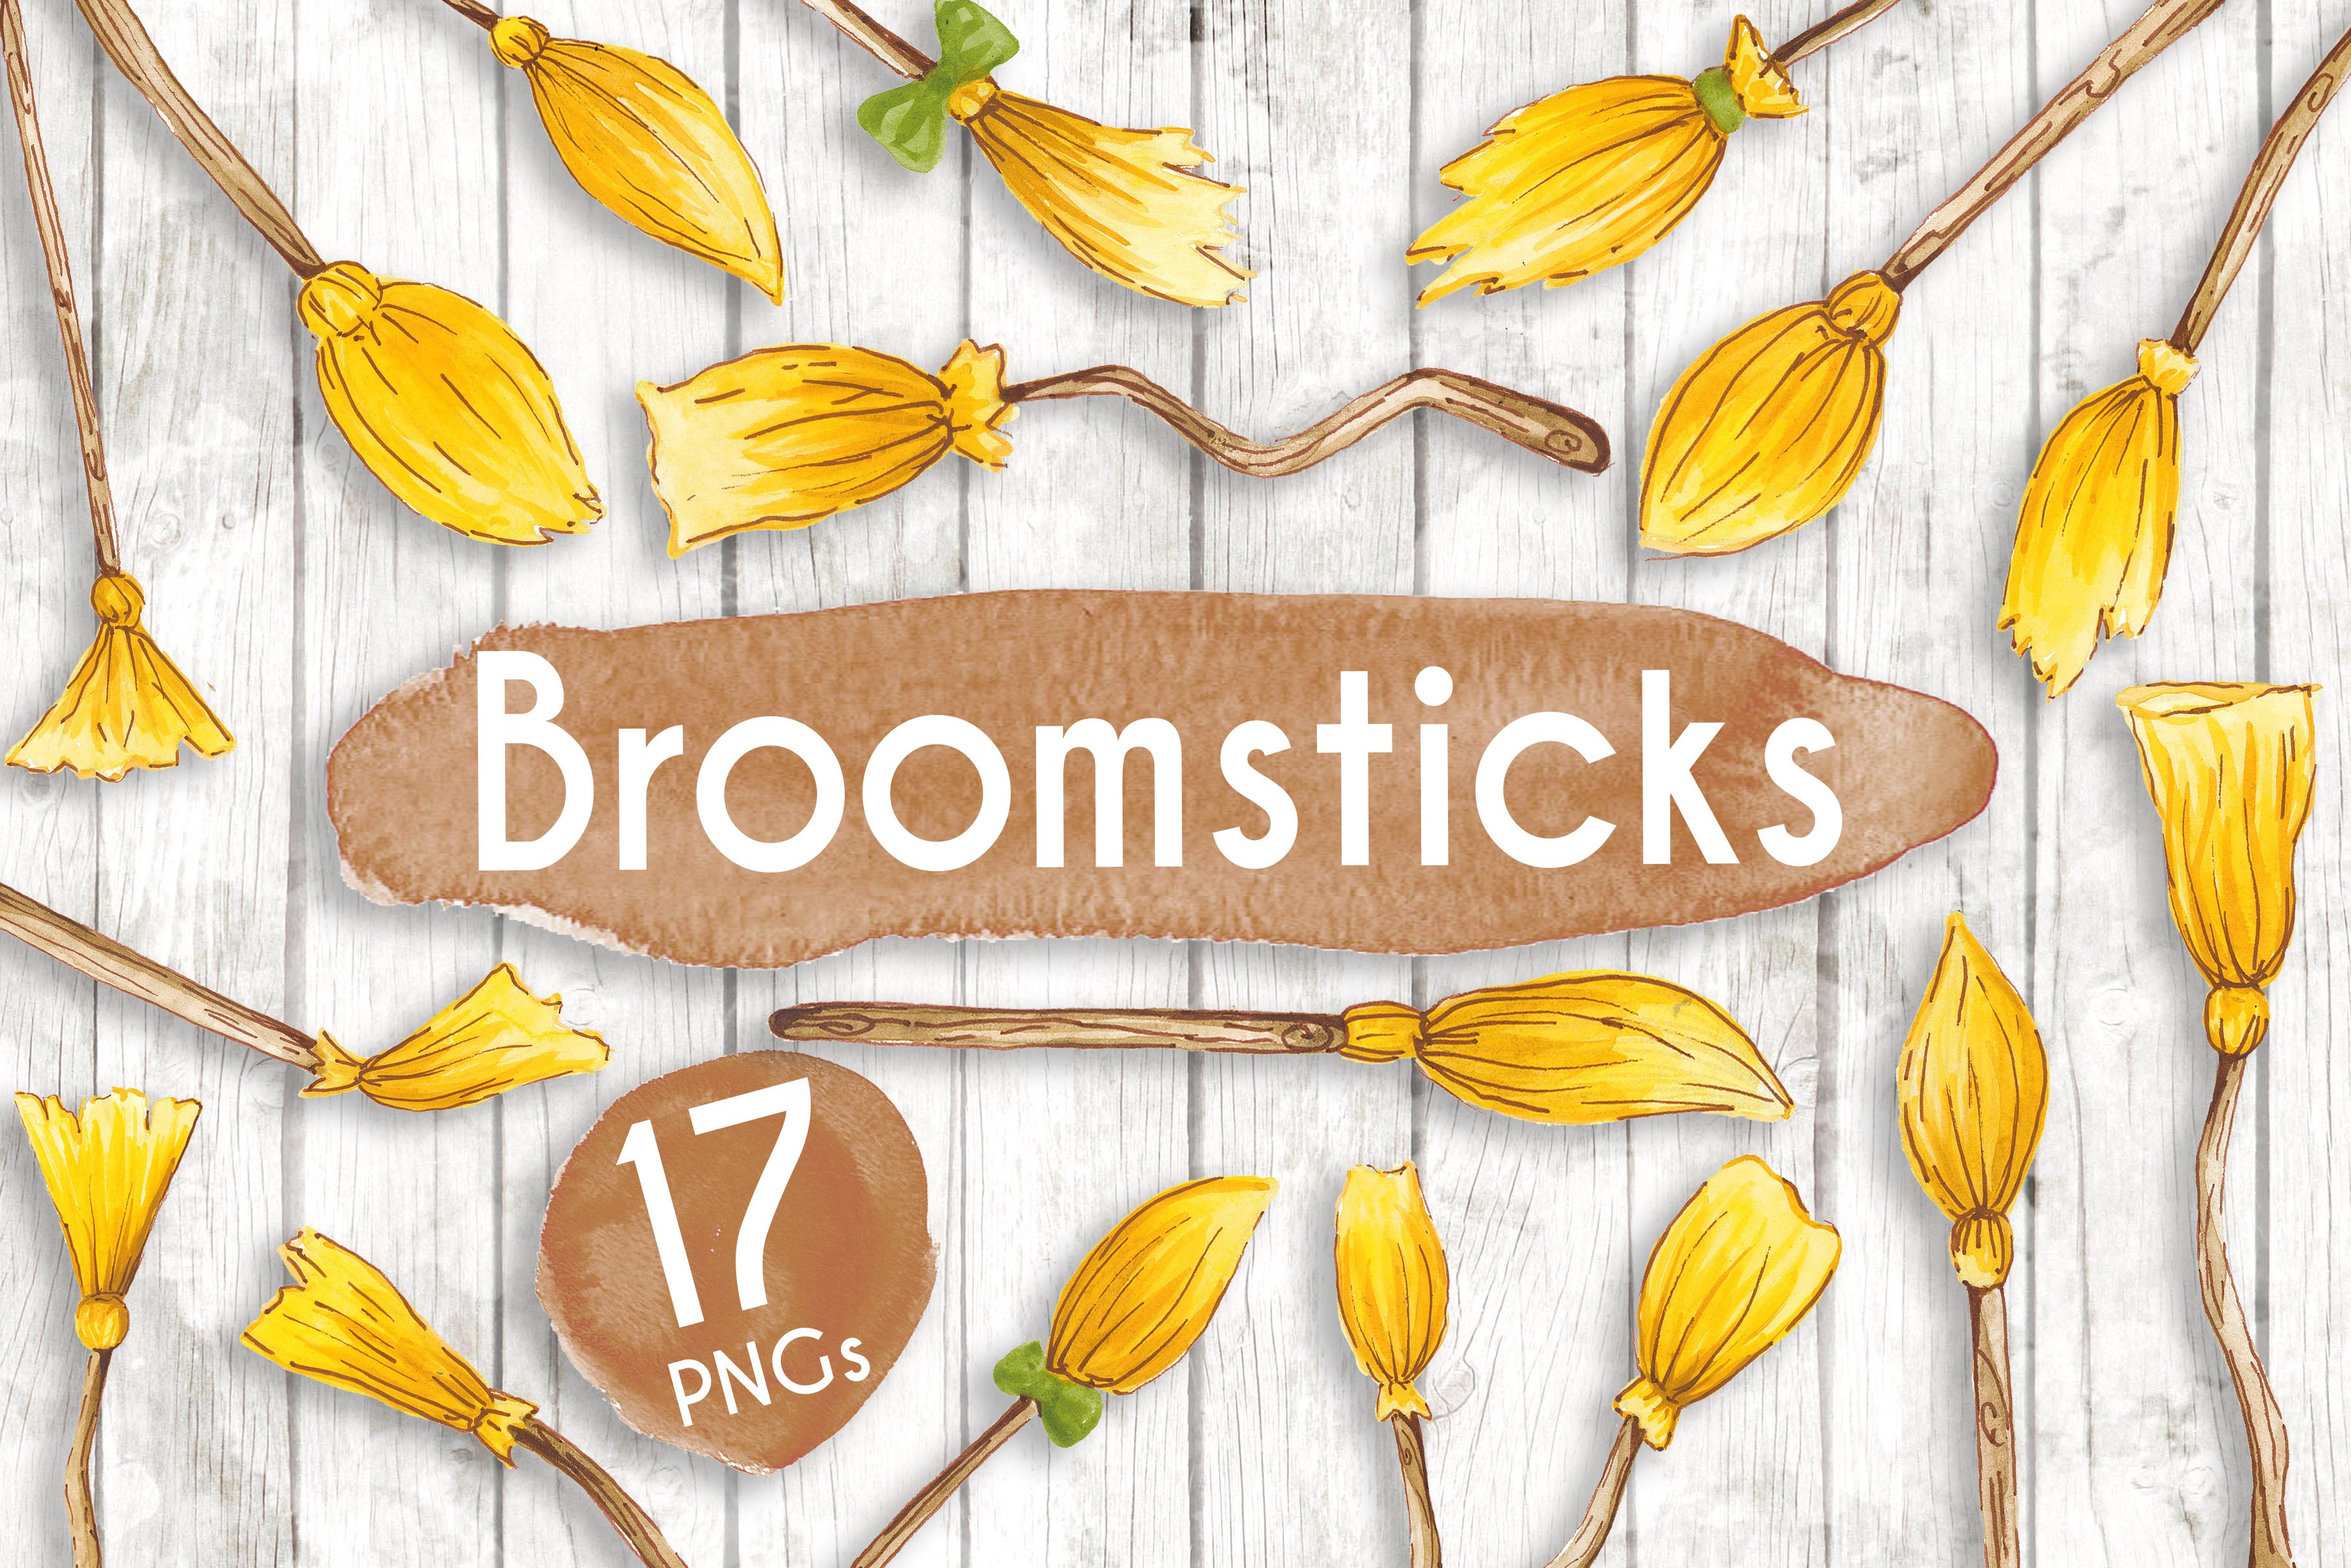 Watercolour Witches Broomsticks cover image.